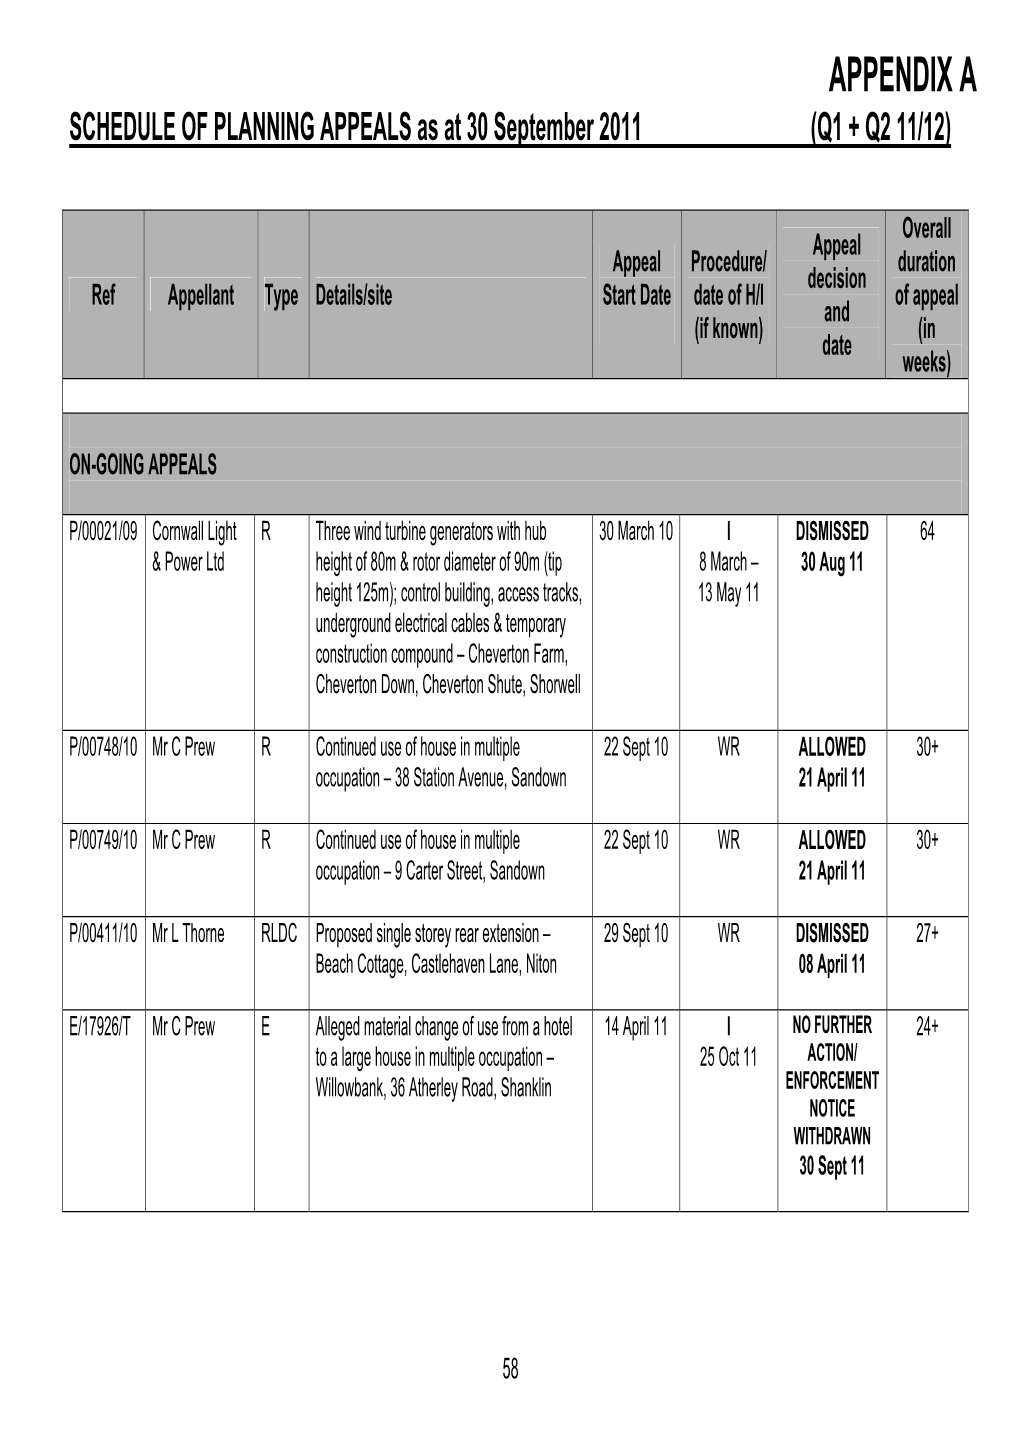 SCHEDULE of PLANNING APPEALS As at 30 December 2008